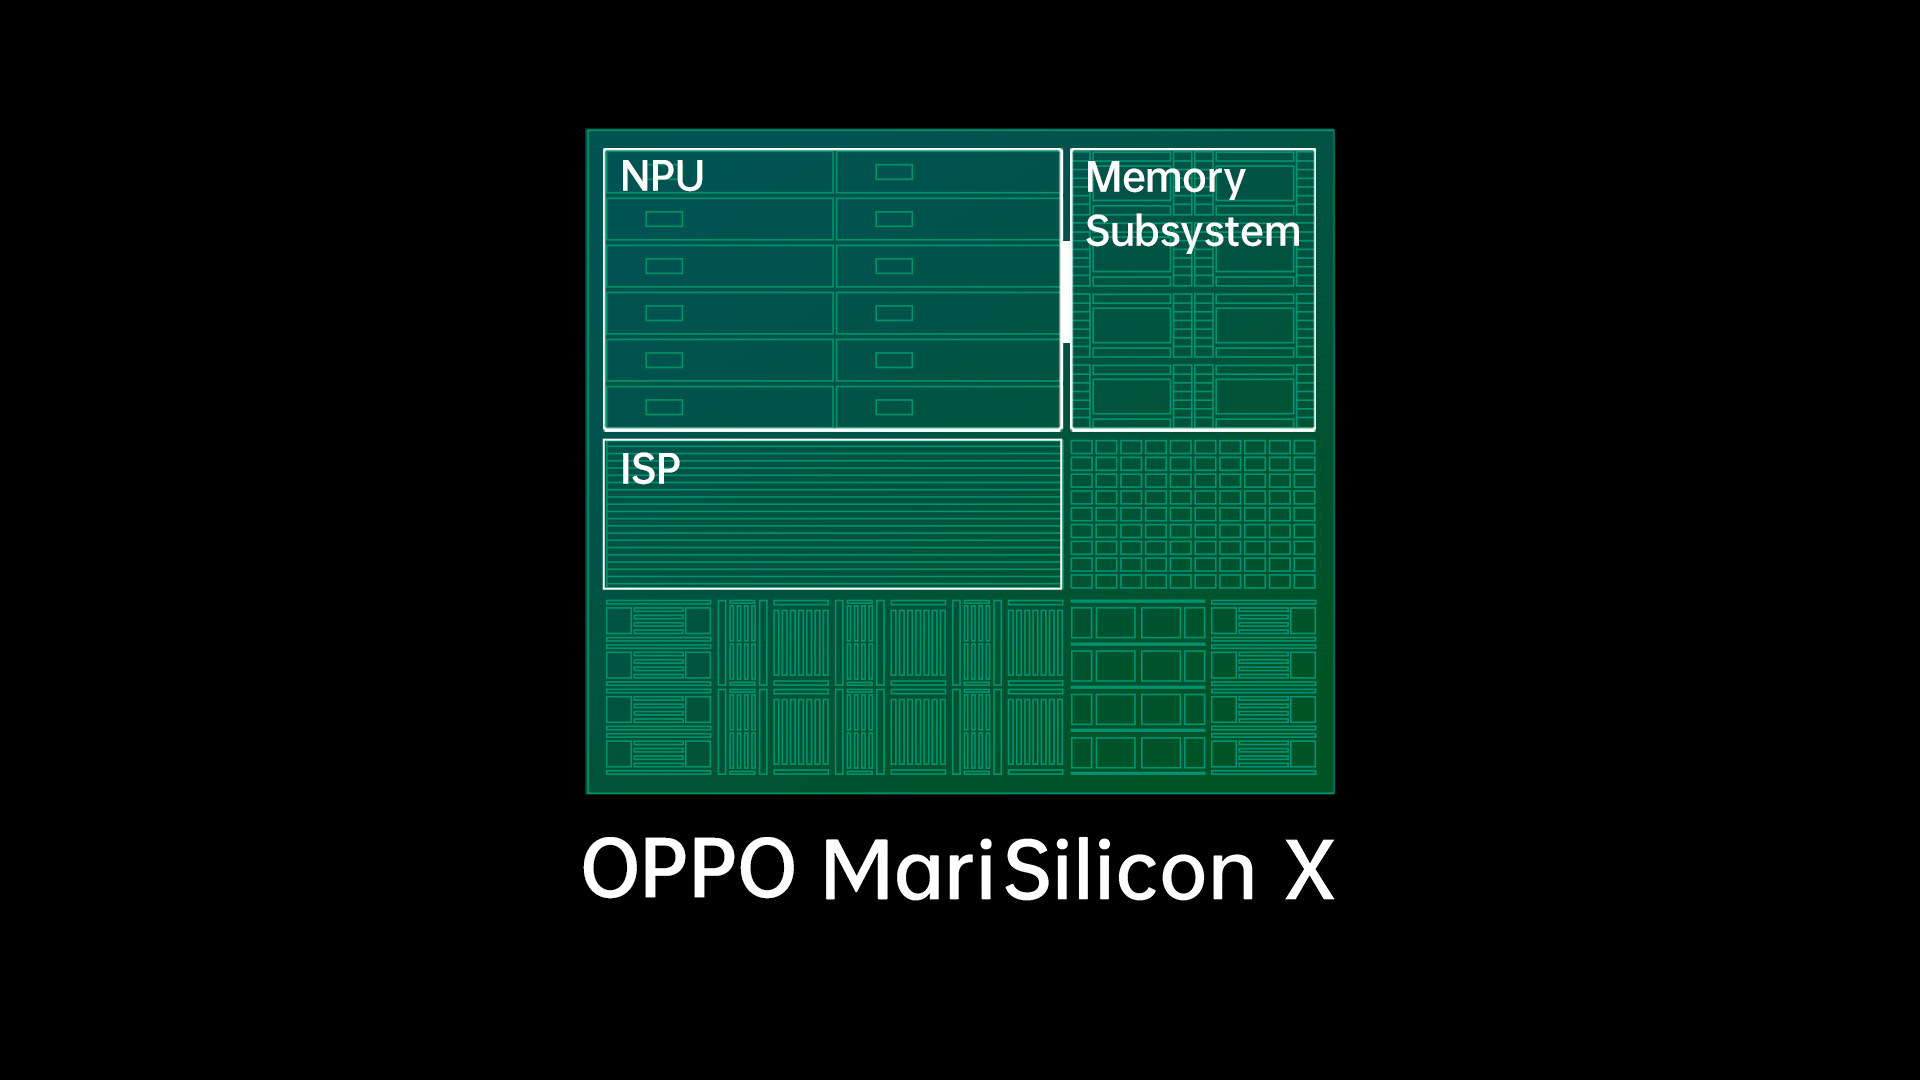 MariSilicon X: OPPO unveils their first imaging chip